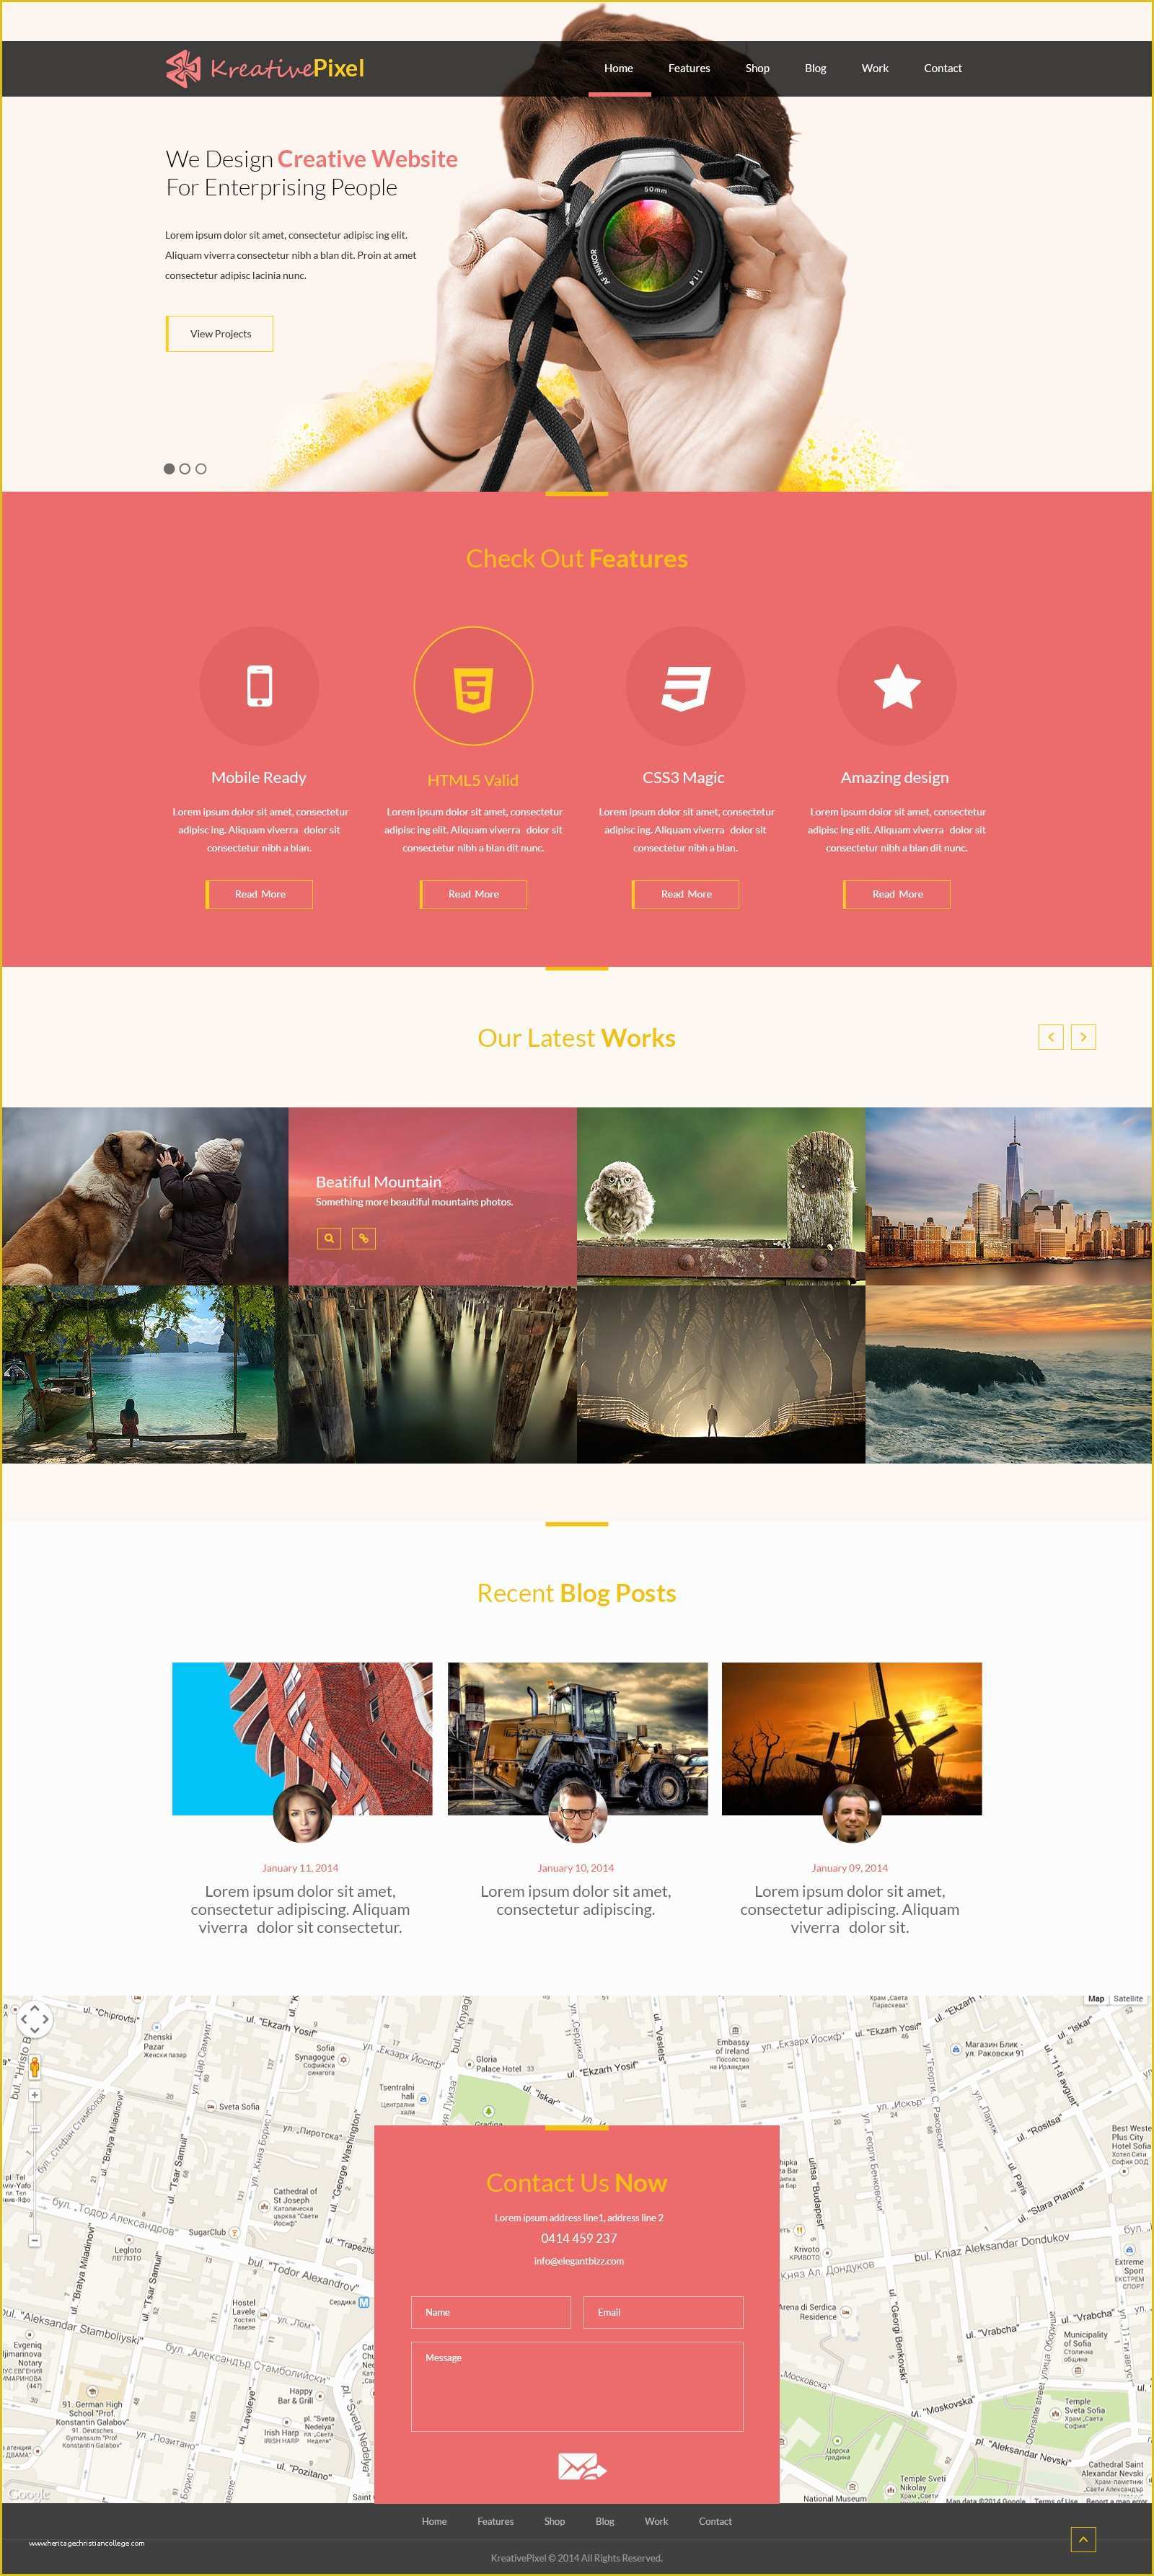 Web Design Templates Psd Free Download Of Creative Website Design Template Psd Download Psd